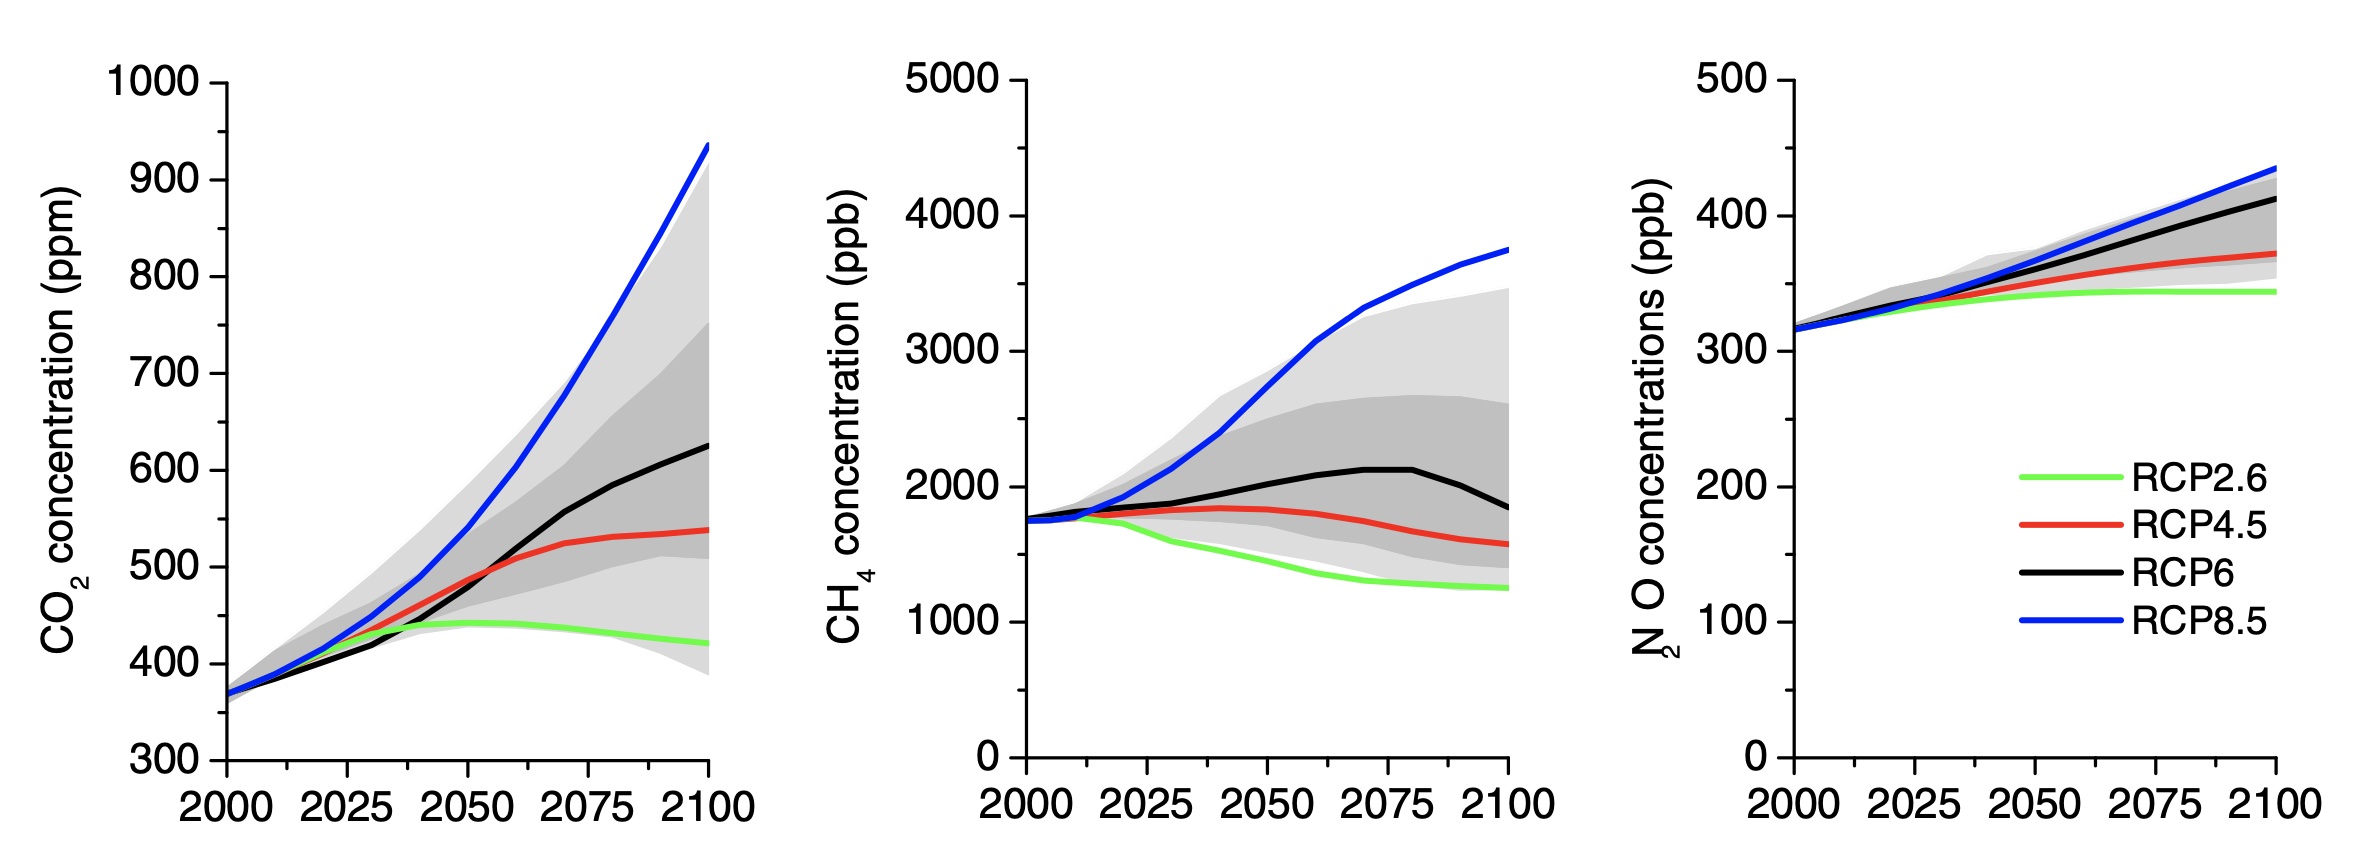 The development of greenhouse gas concentrations during the 21st century as a function of the corresponding scenario. We focus here on RCP4.5 and RCP8.5. Source: [@van_Vuuren_2011]